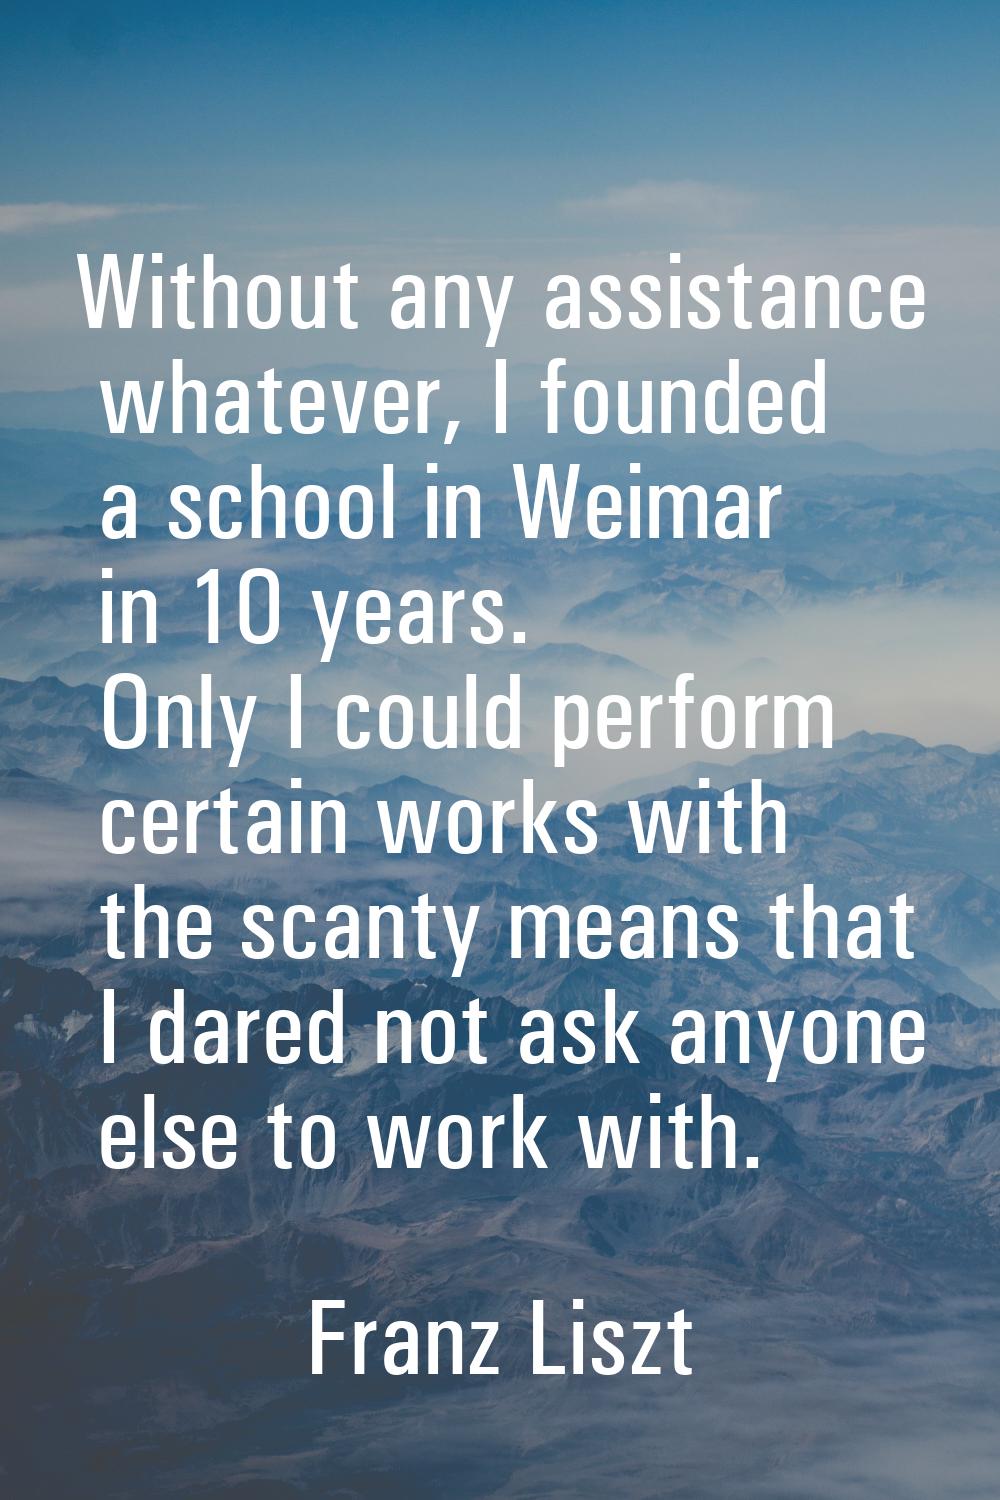 Without any assistance whatever, I founded a school in Weimar in 10 years. Only I could perform cer